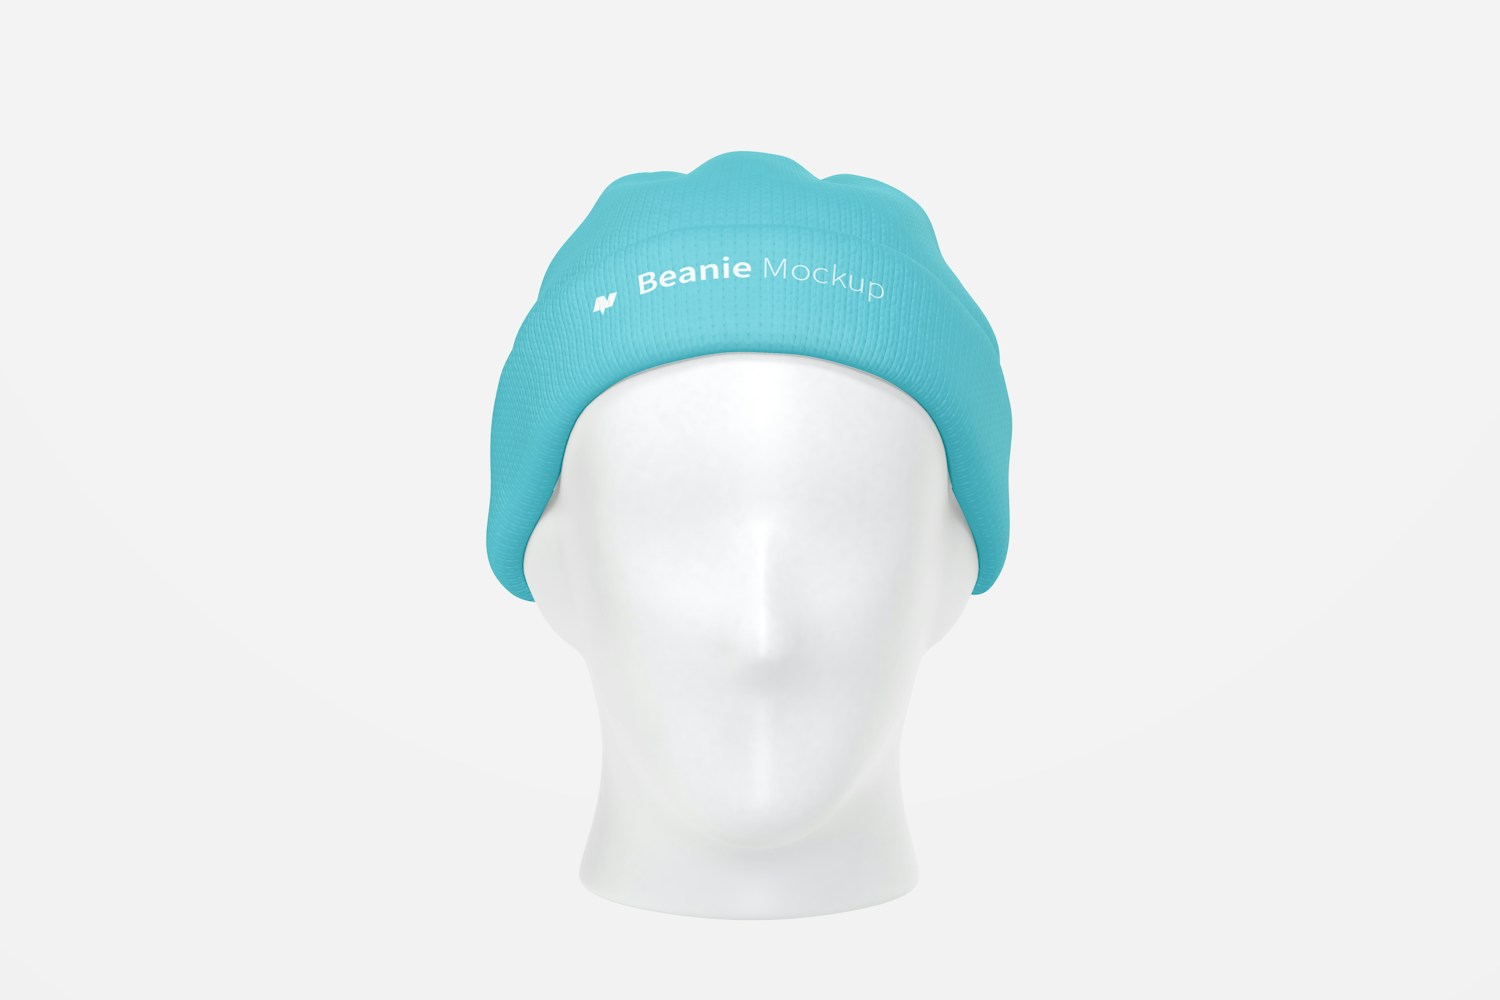 Beanie with Head Mockup, Front View